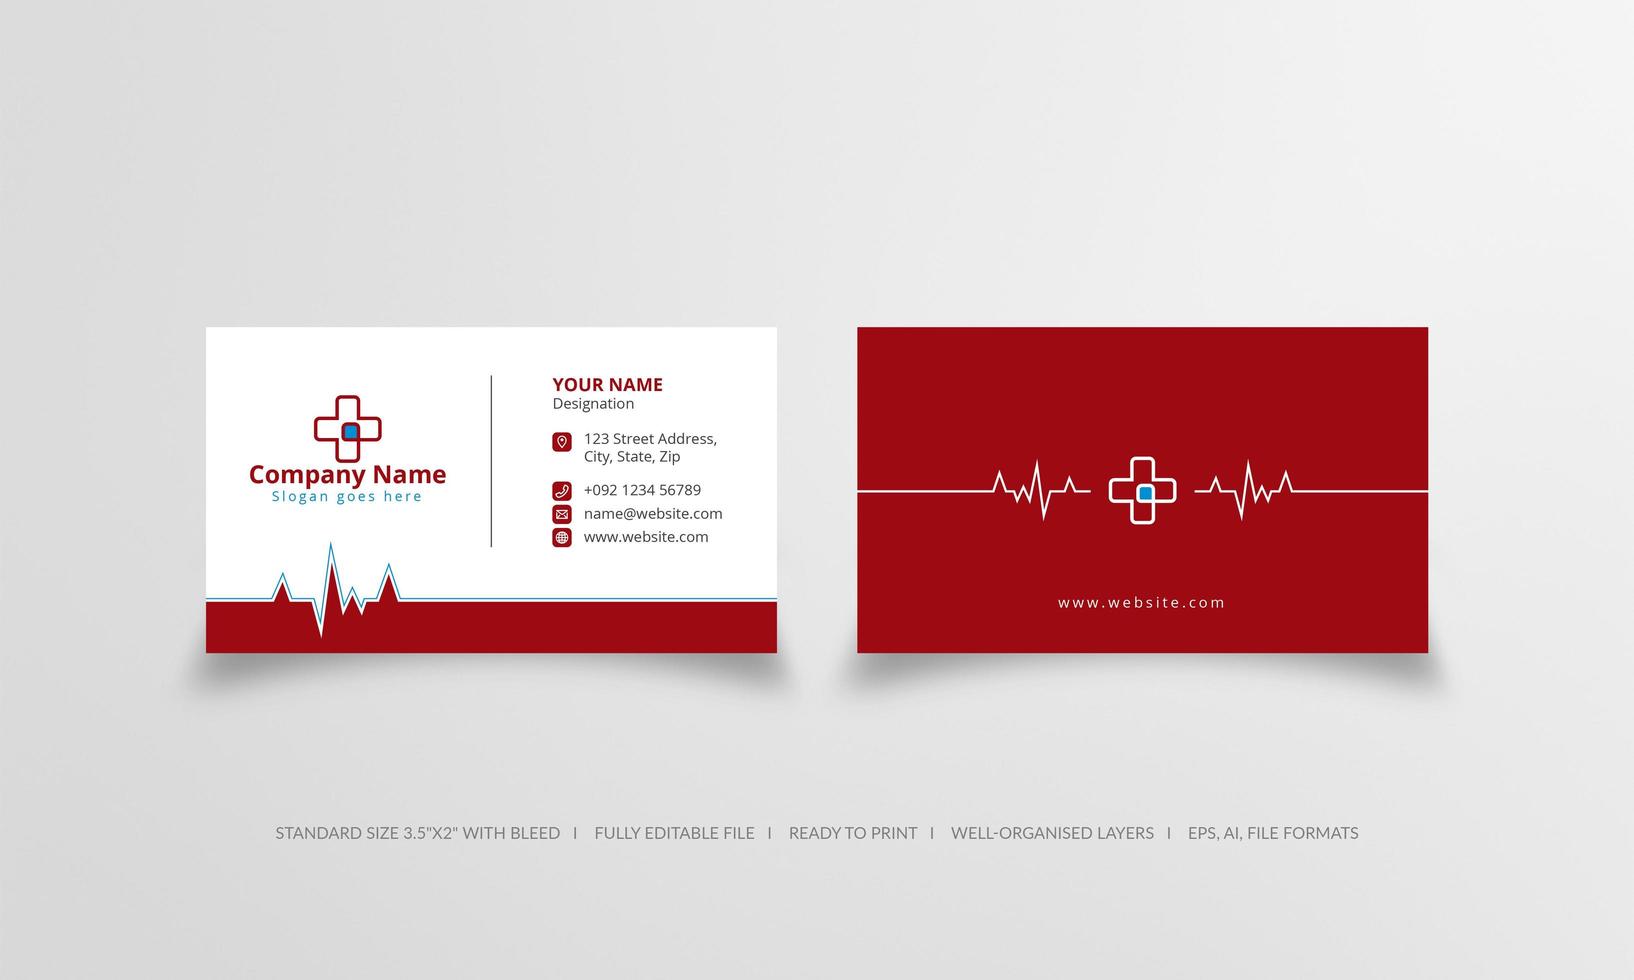 Health care business card in red and blue accents vector